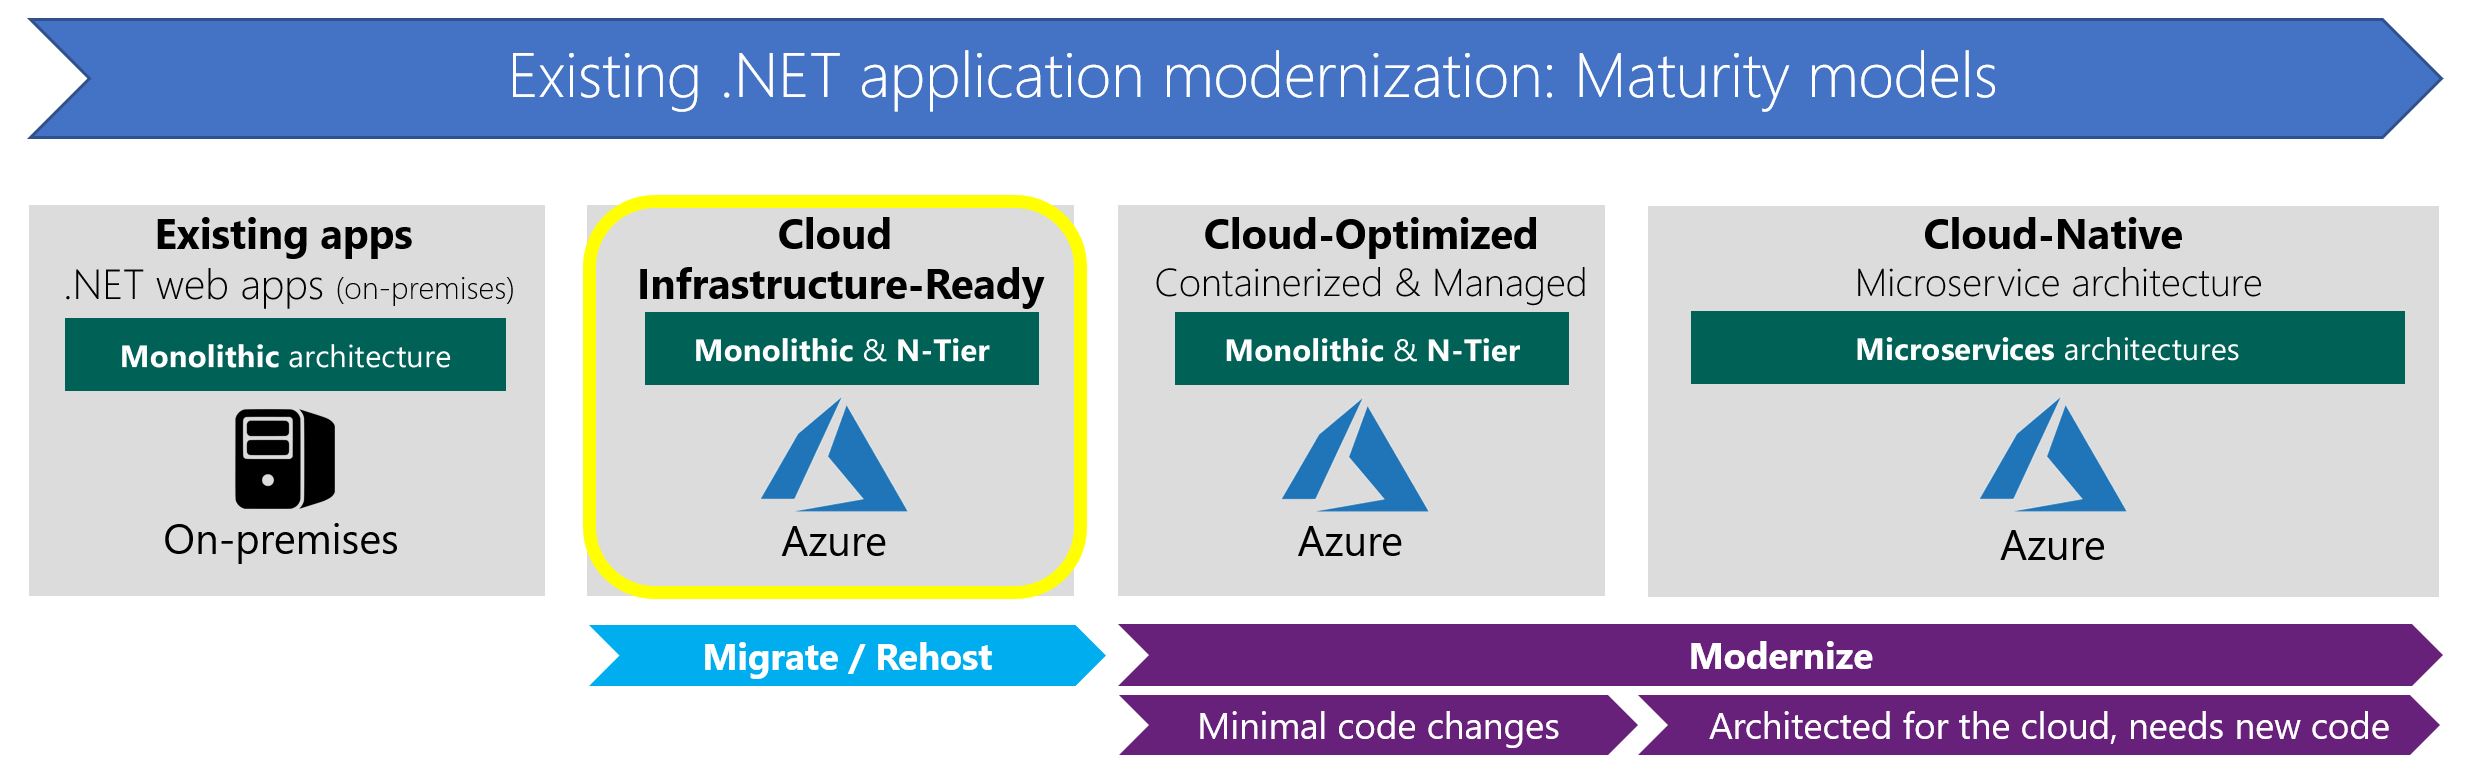 Lift and shift existing .NET apps to Azure IaaS (Cloud  Infrastructure-Ready) | Microsoft Learn